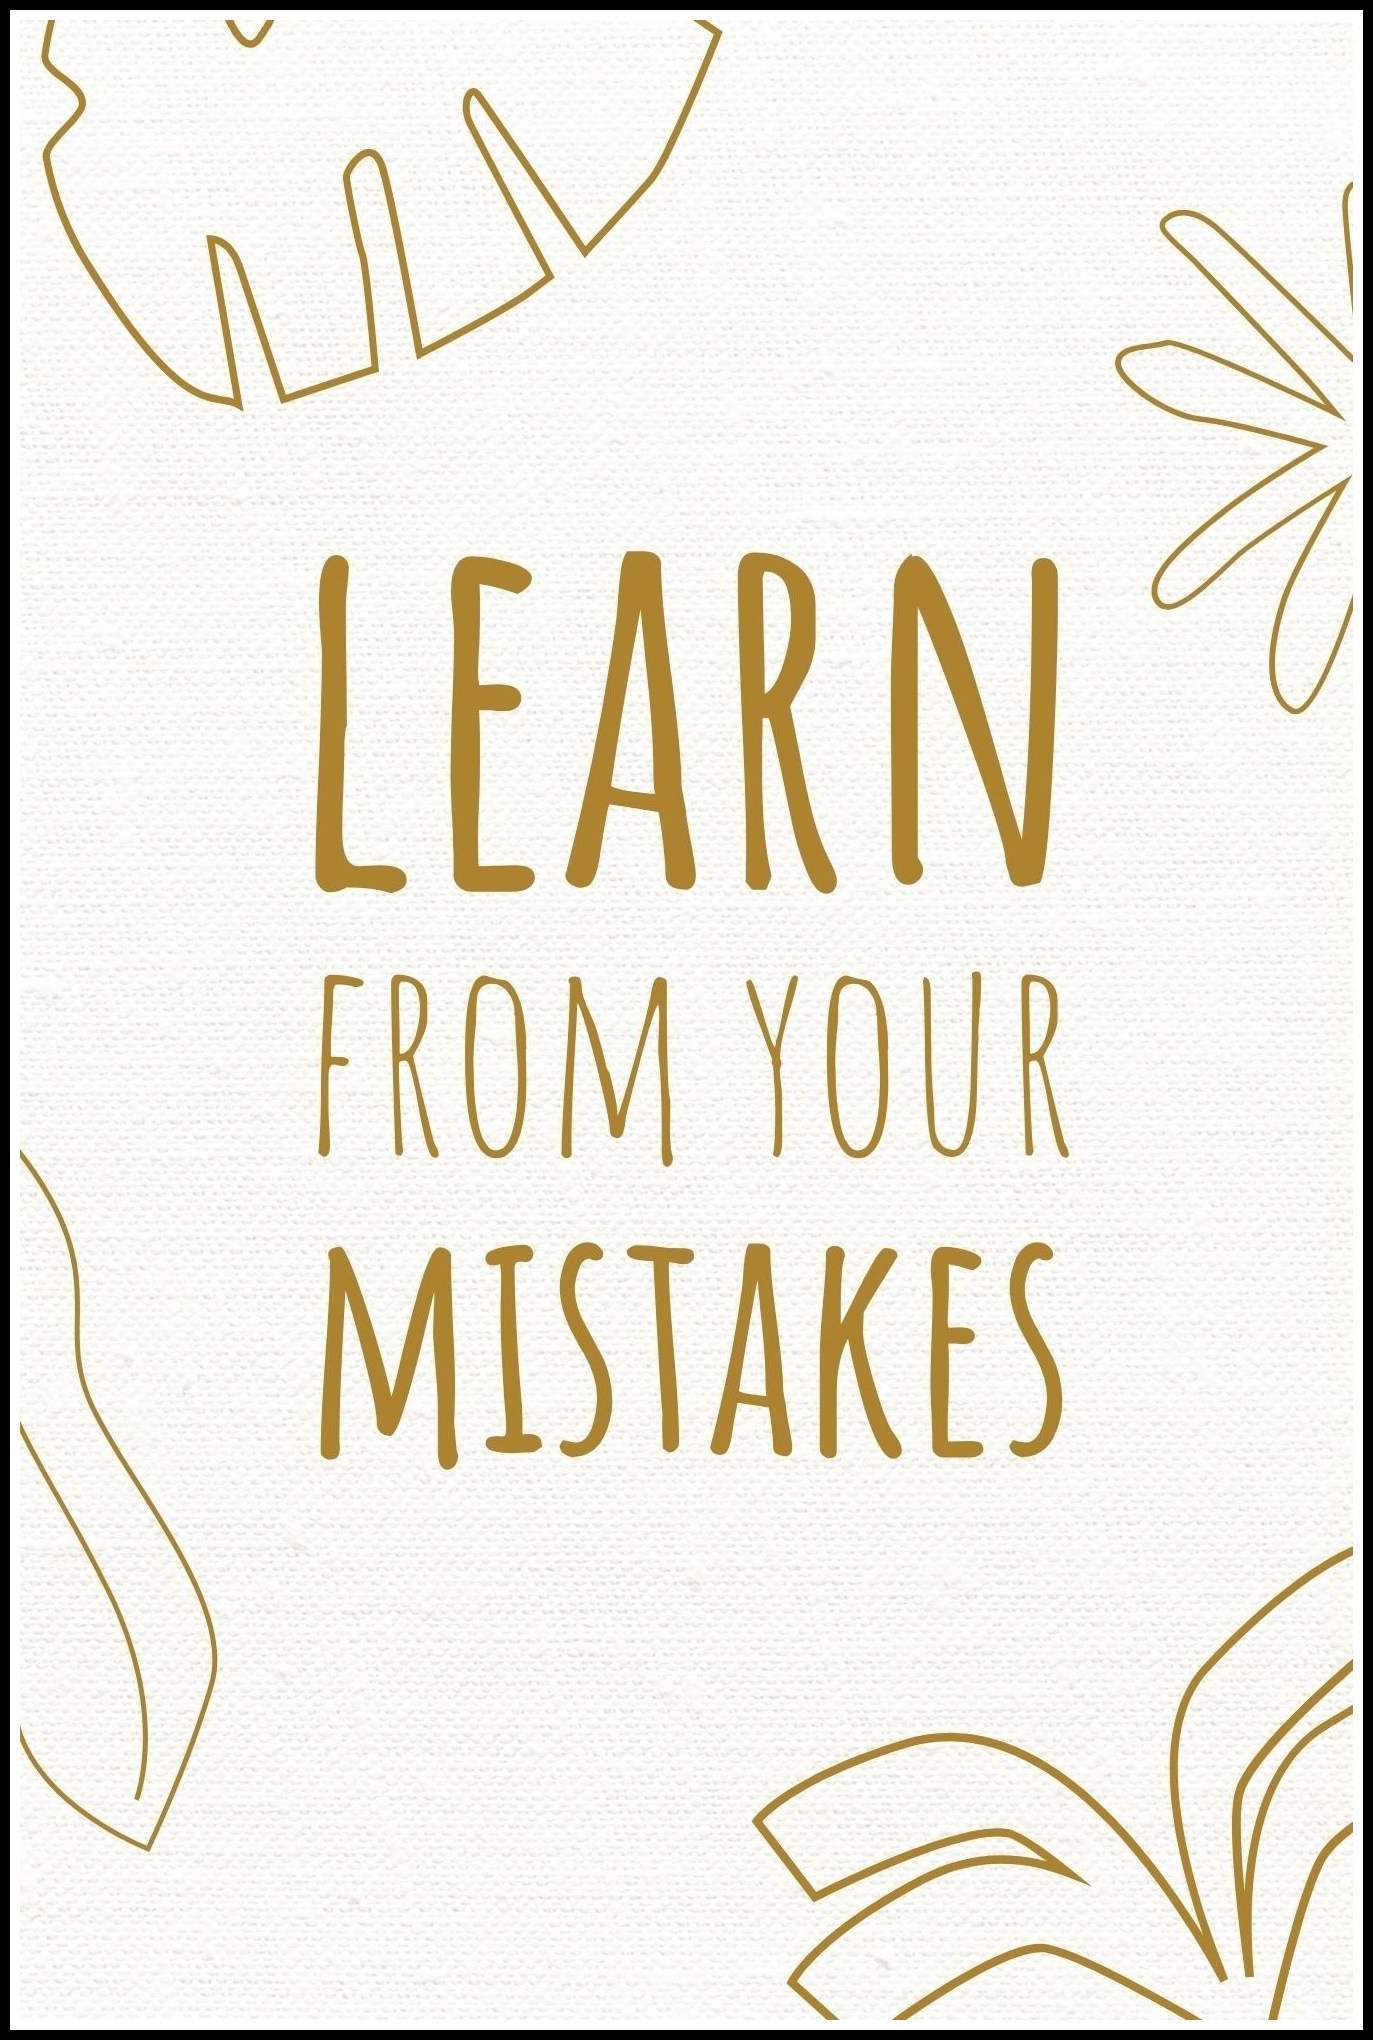 Your Mistakes Wall Printed Poster